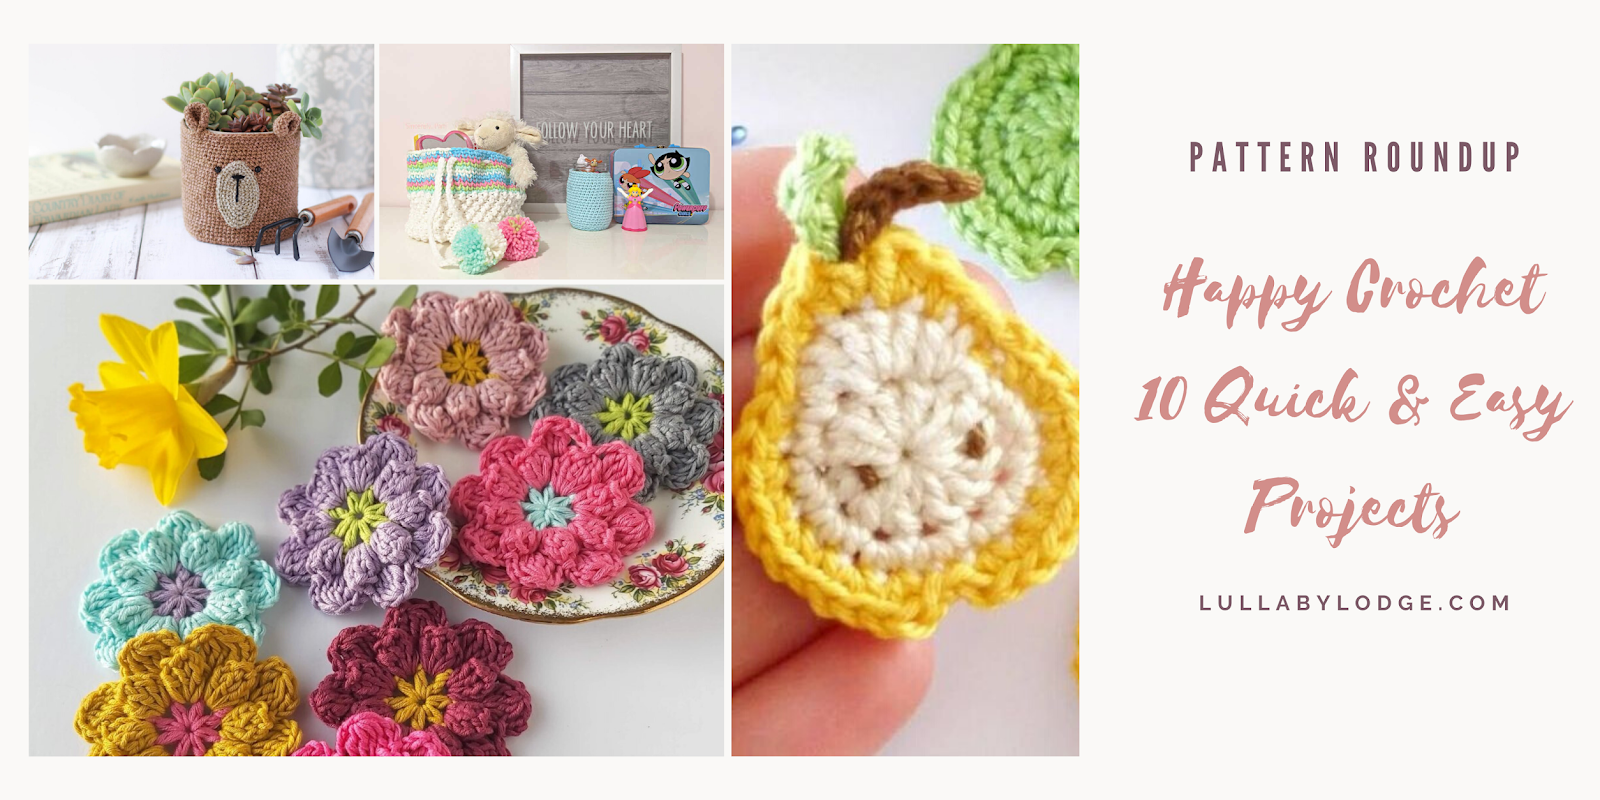 FREE Crochet Patterns - Make These Popular Projects! 